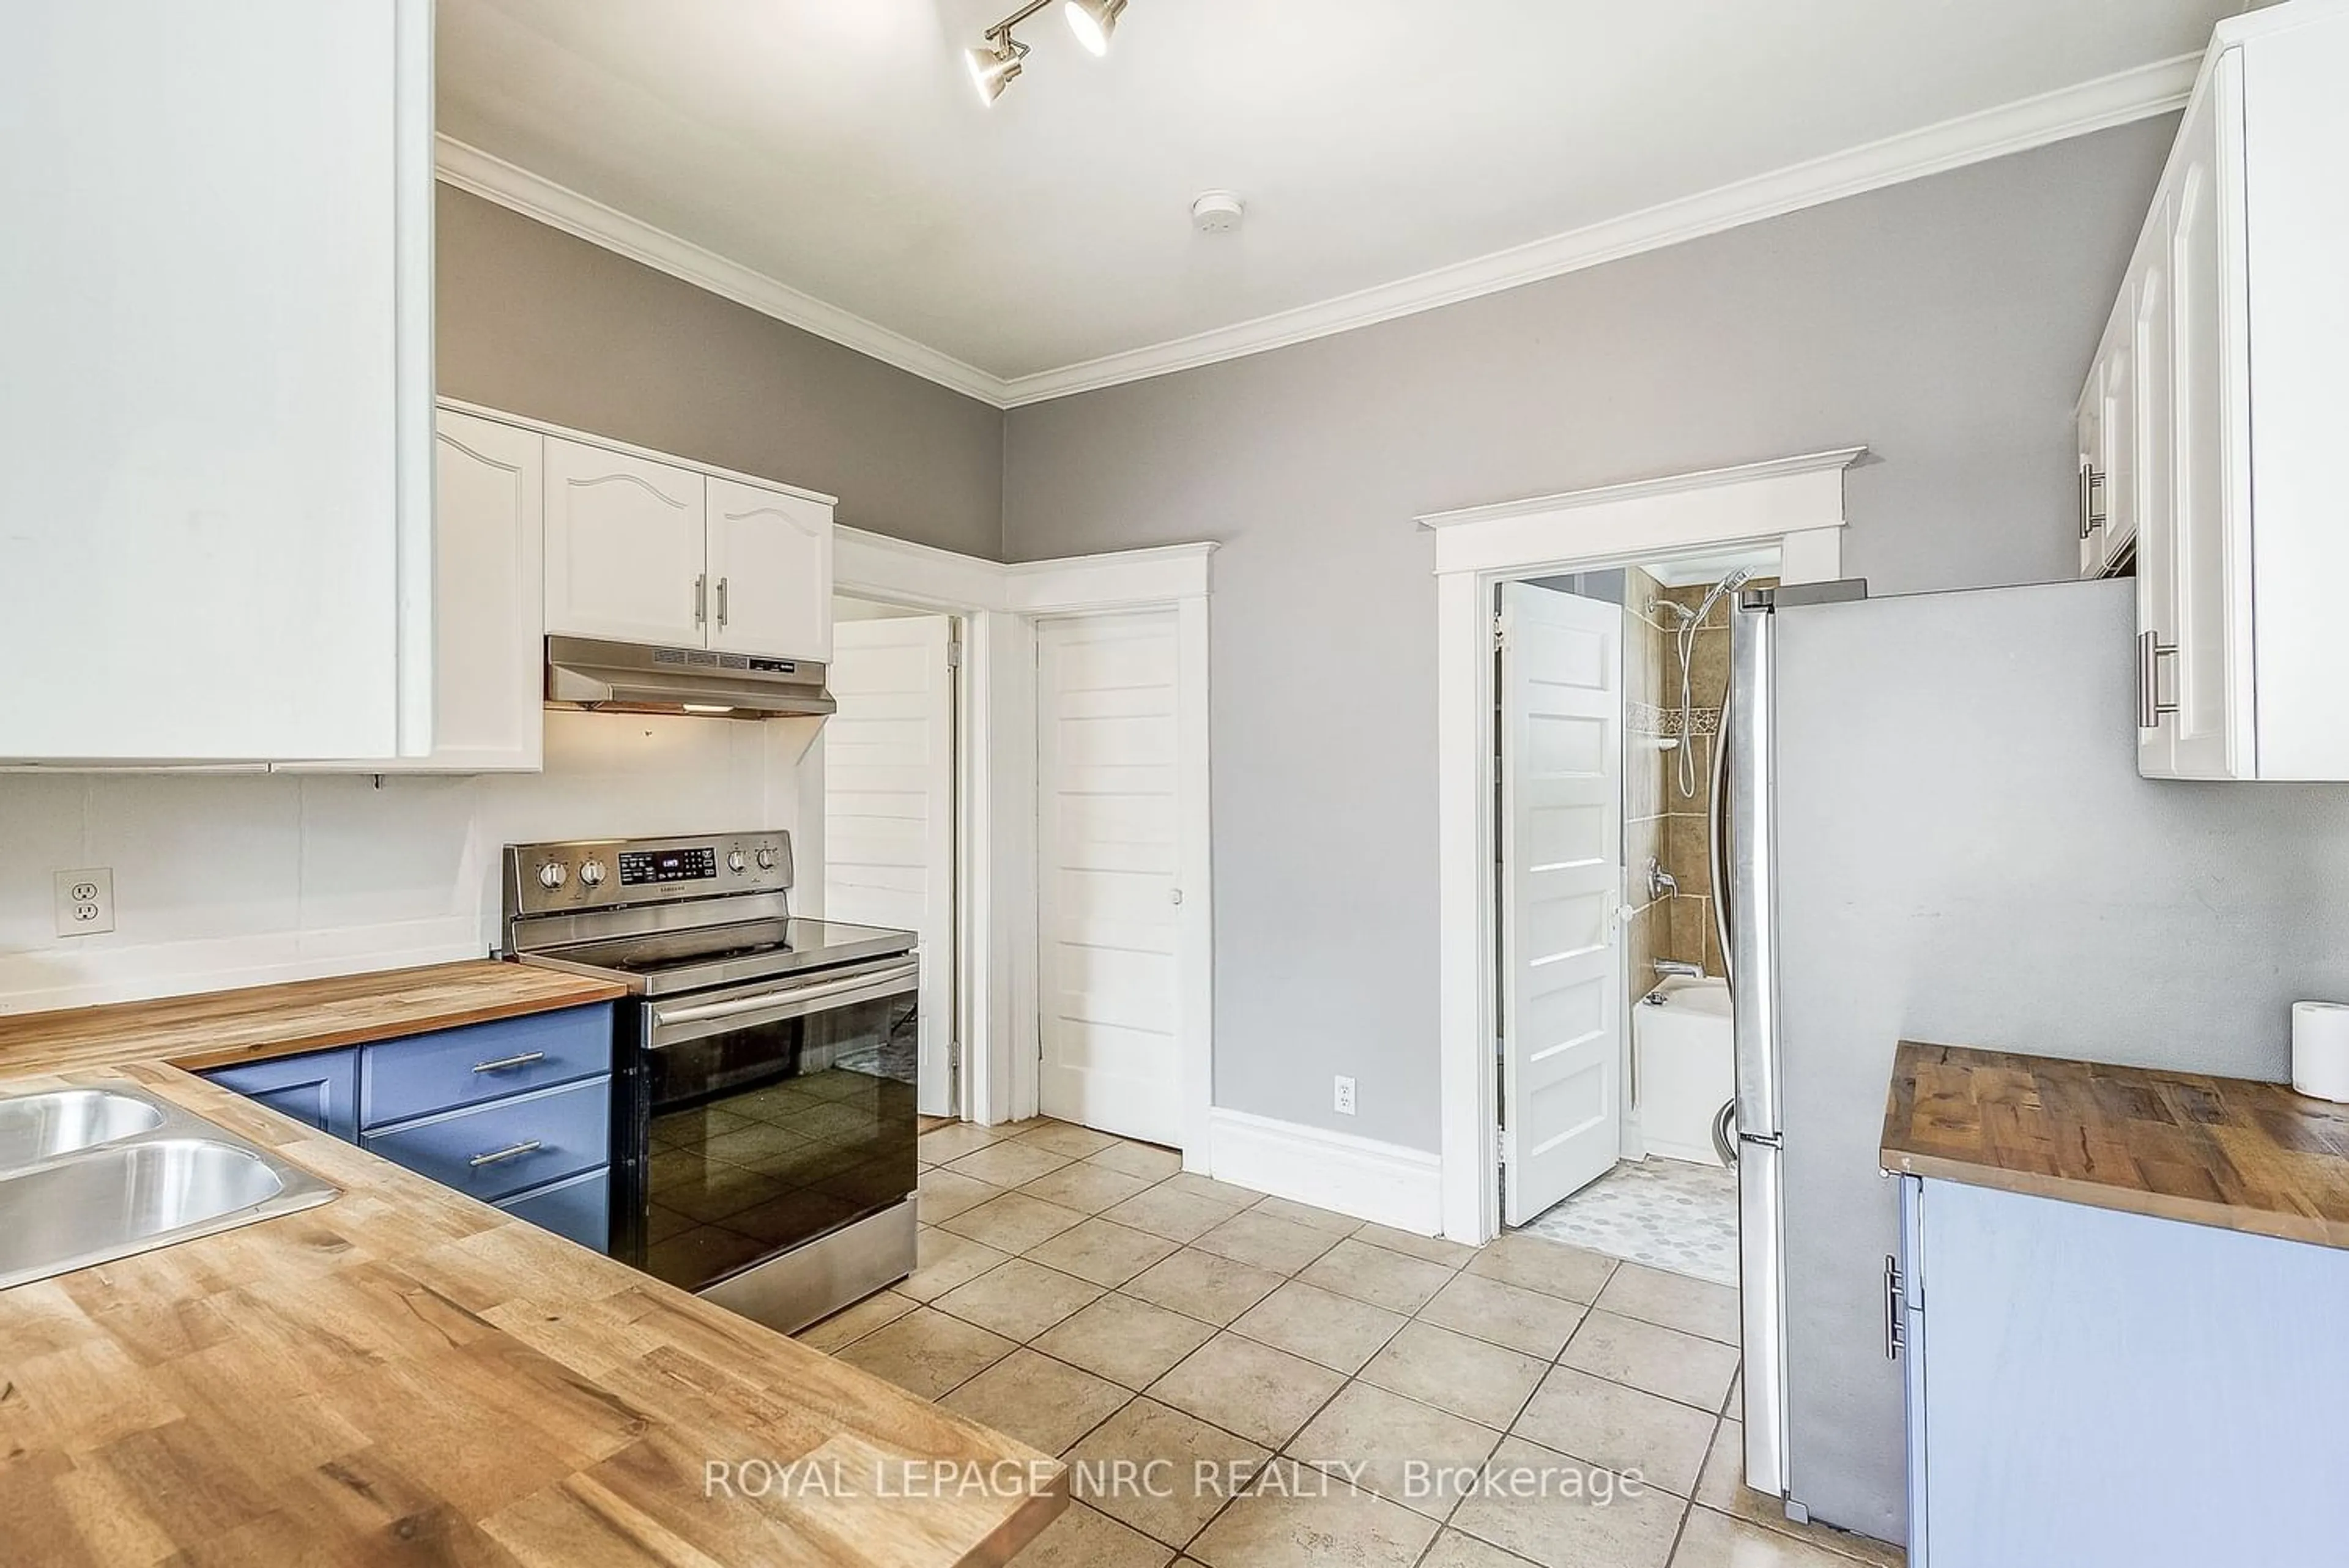 Standard kitchen for 17 Marquis St, St. Catharines Ontario L2R 4Y5